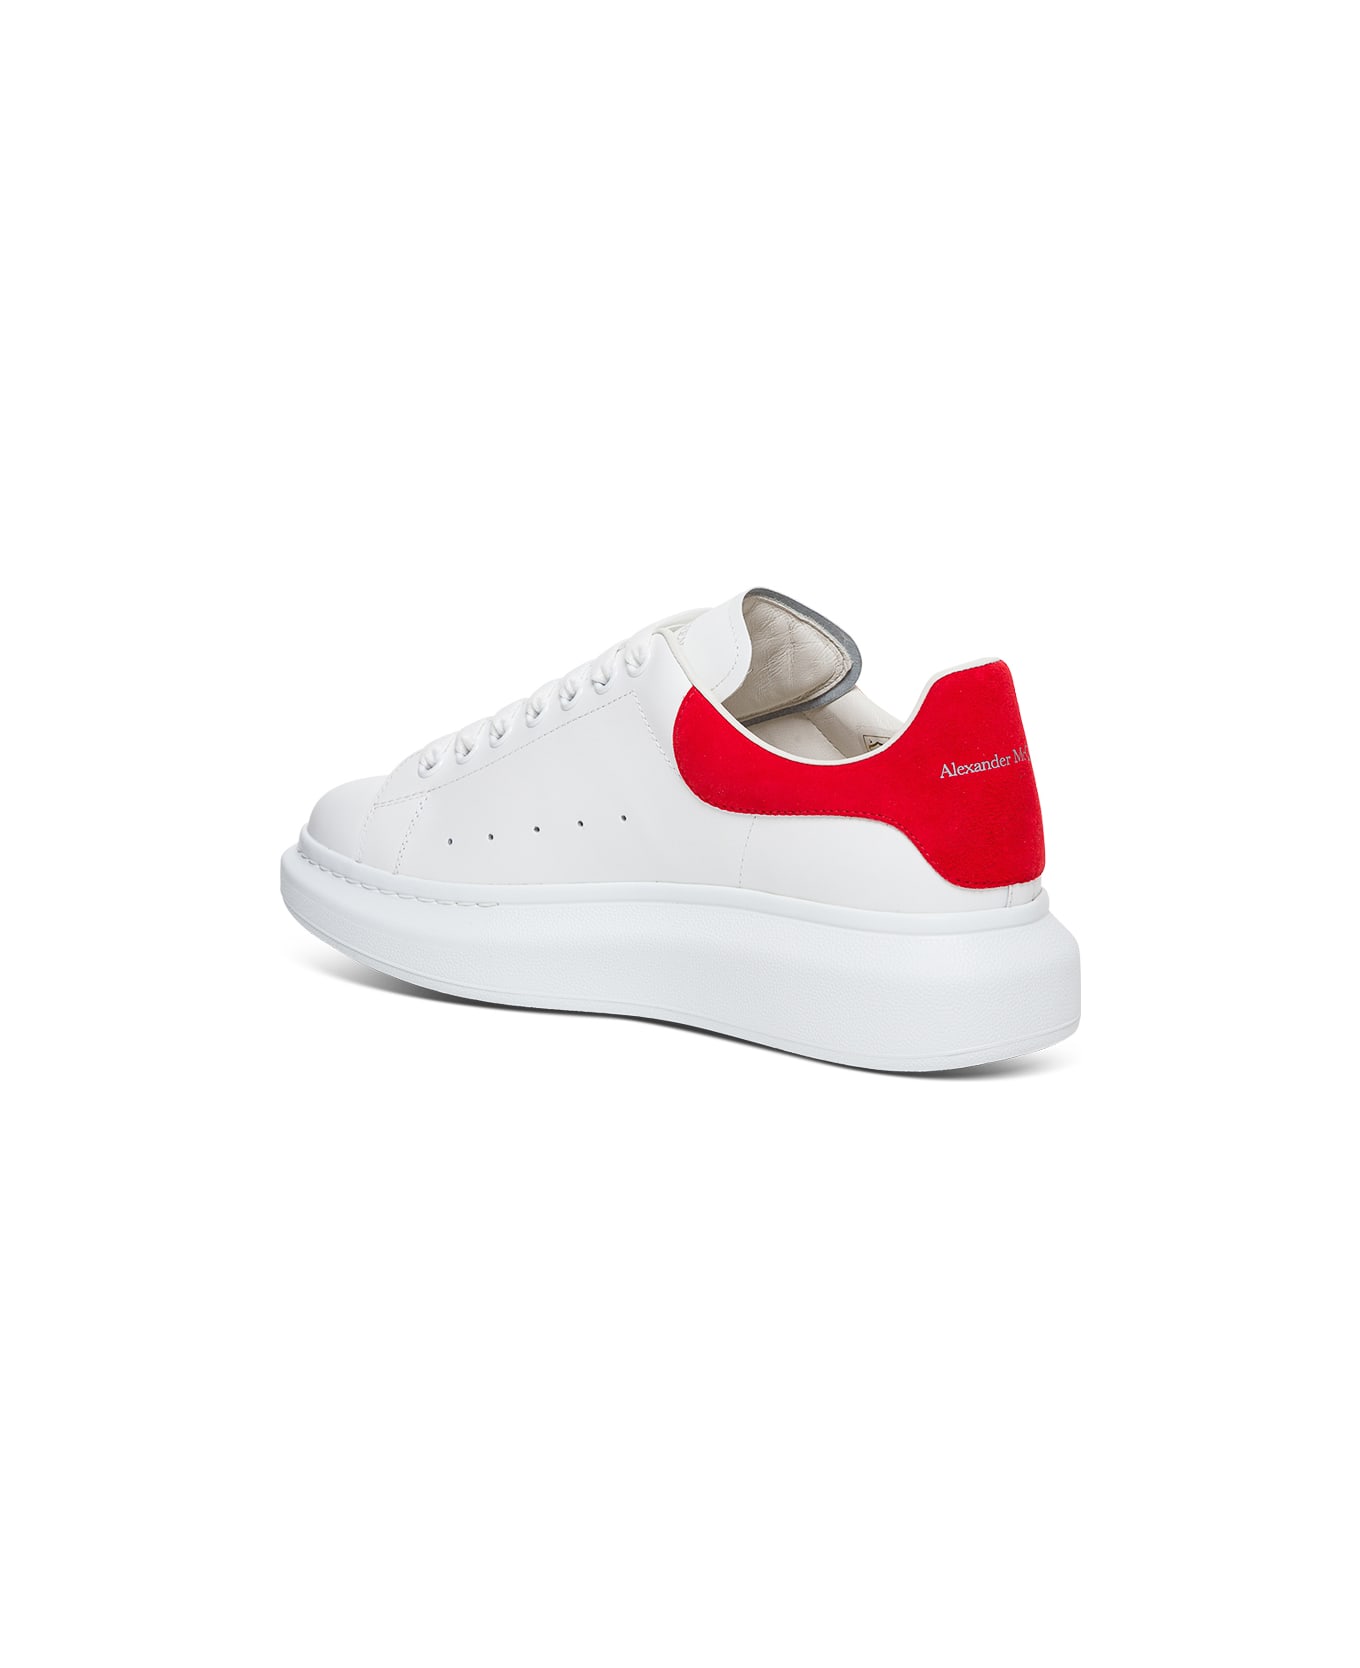 Alexander McQueen Man's Oversize White Leather And Red Heel Sneakers - White